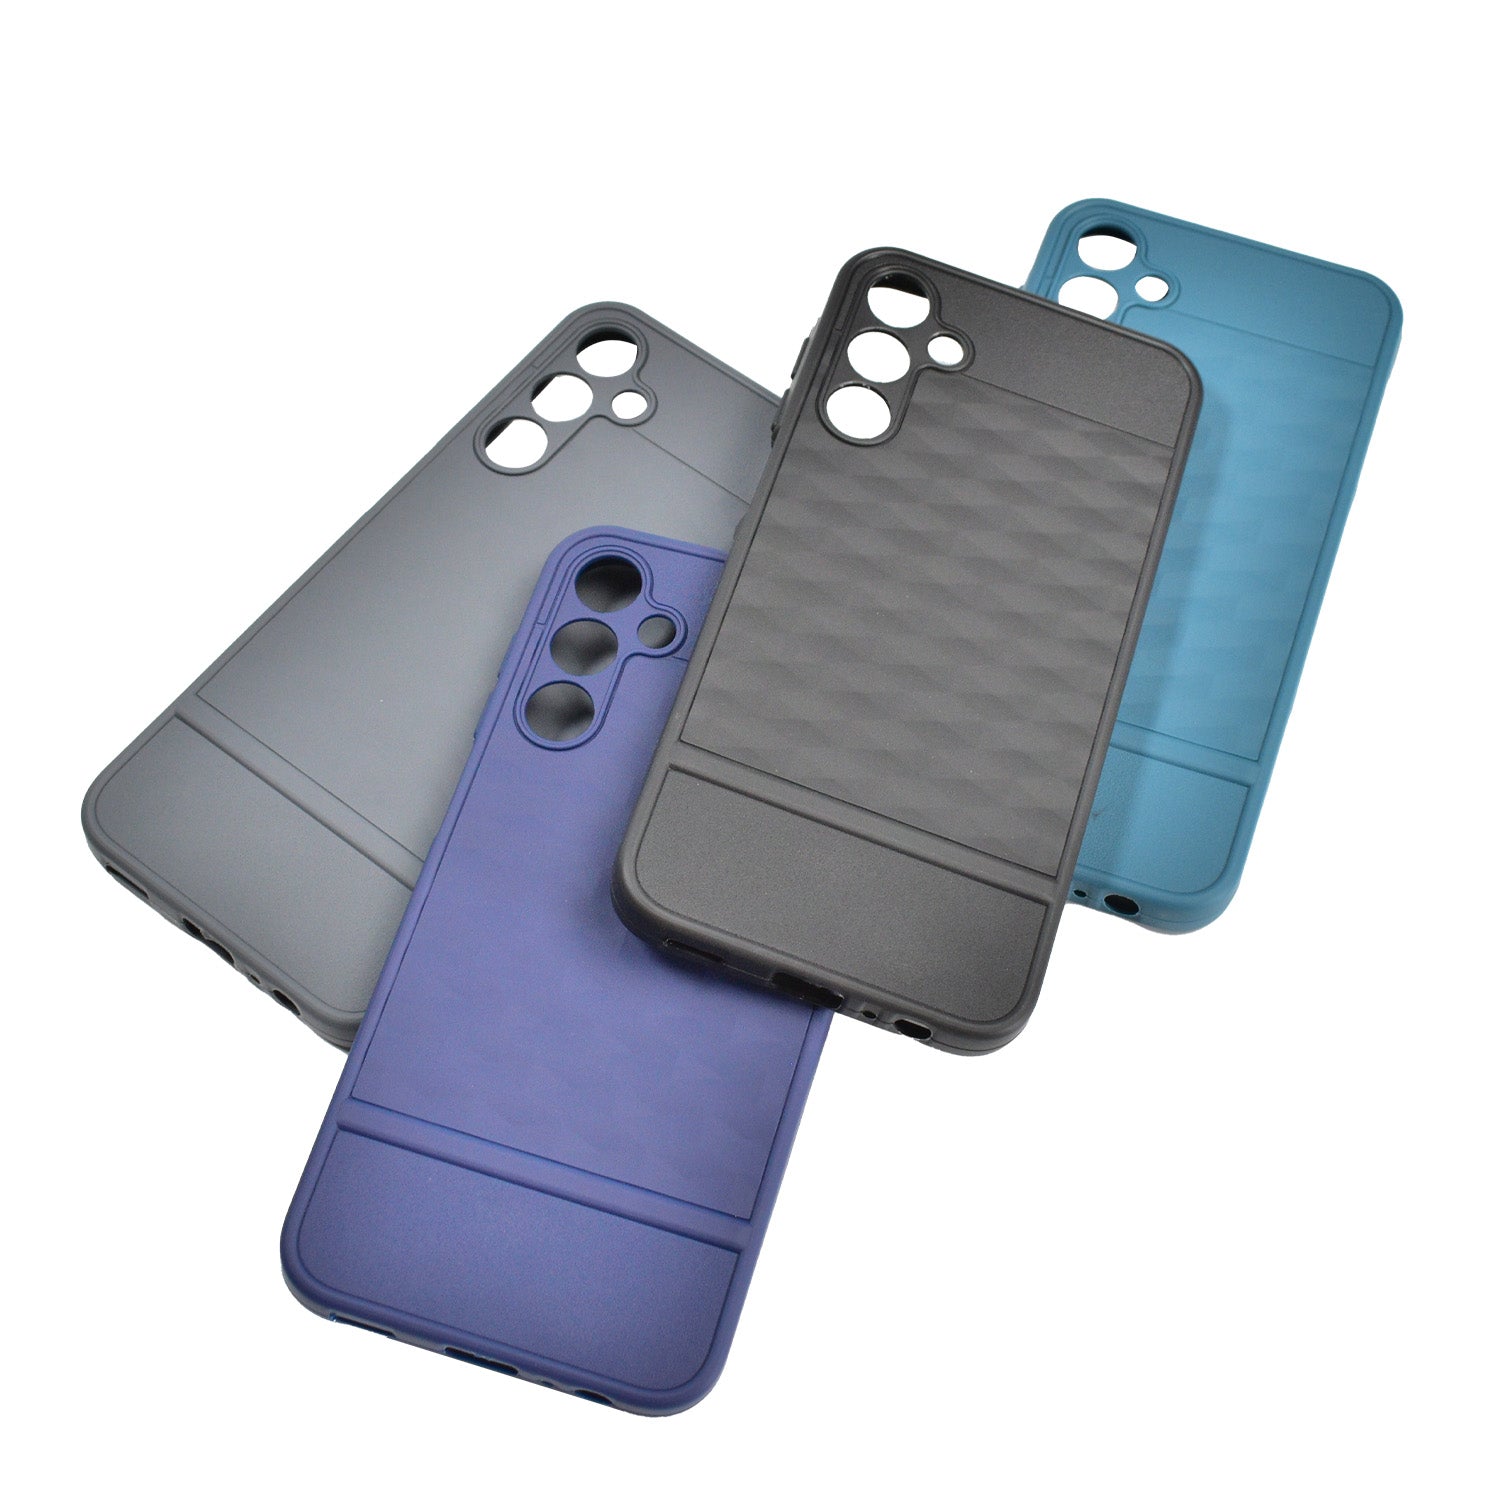 Diamond Textured Soft Silicone Case For Oppo